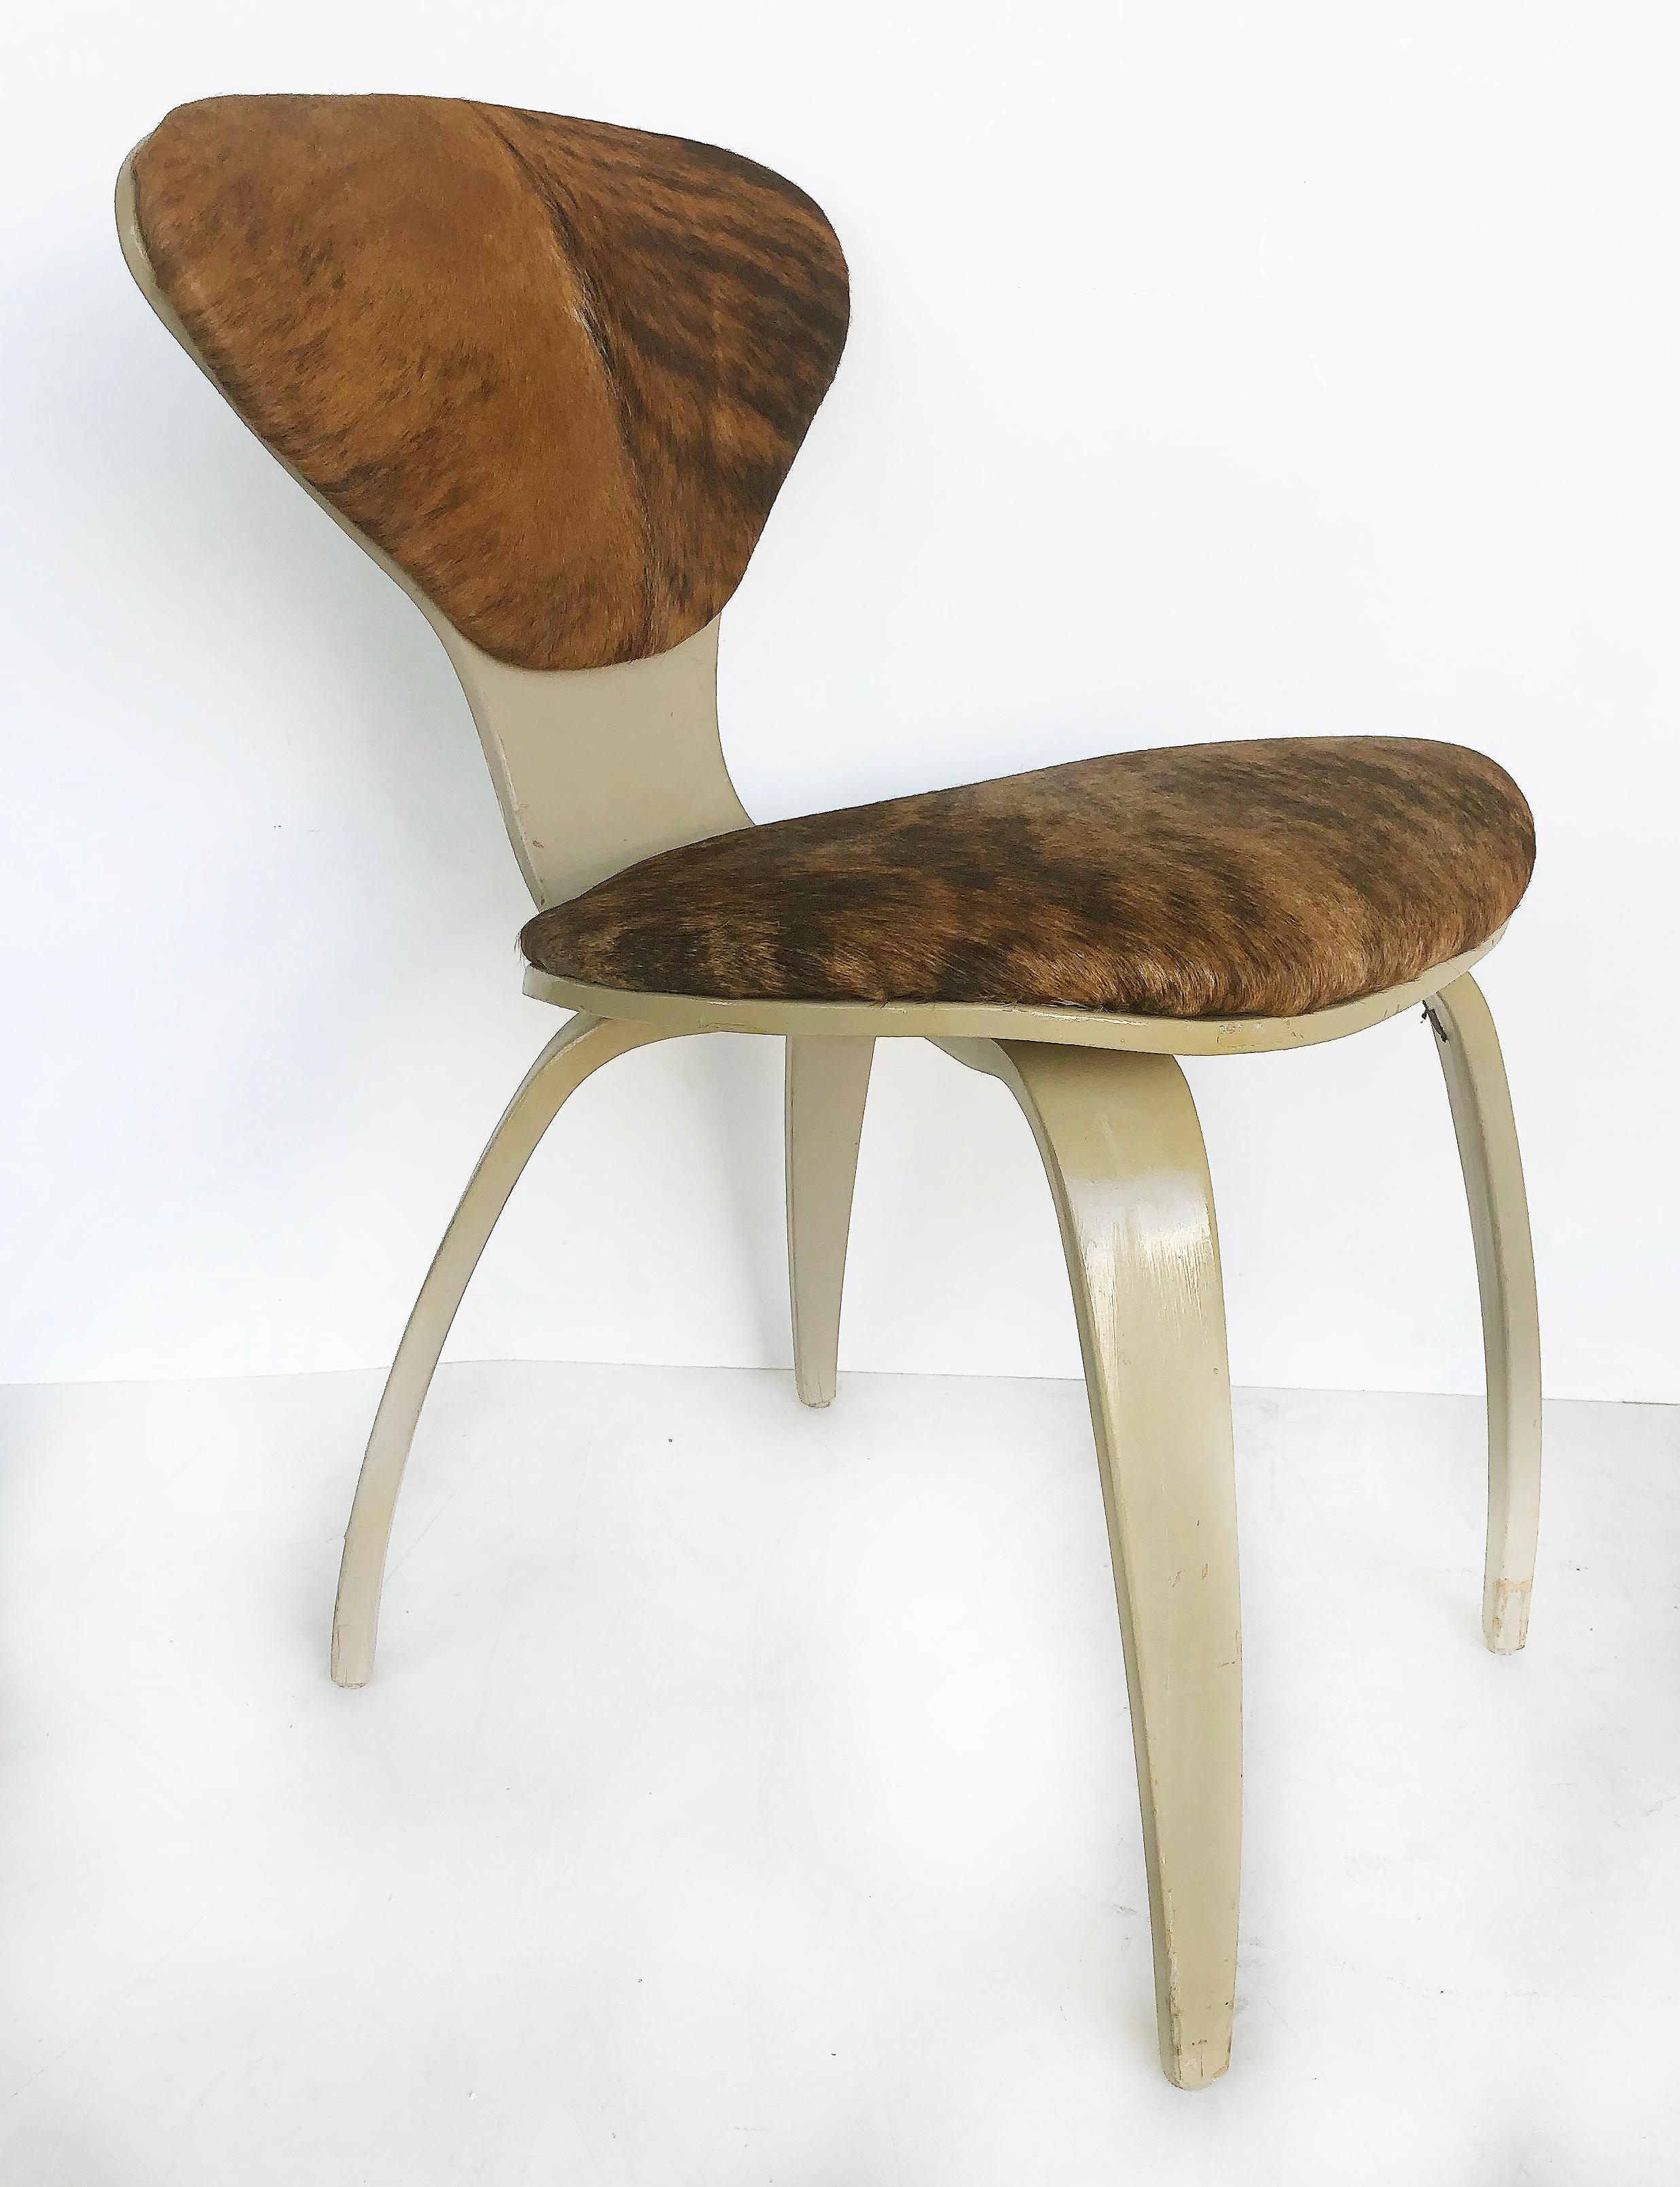 American Norman Cherner Plycraft Chair Upholstered in Cowhide and Painted